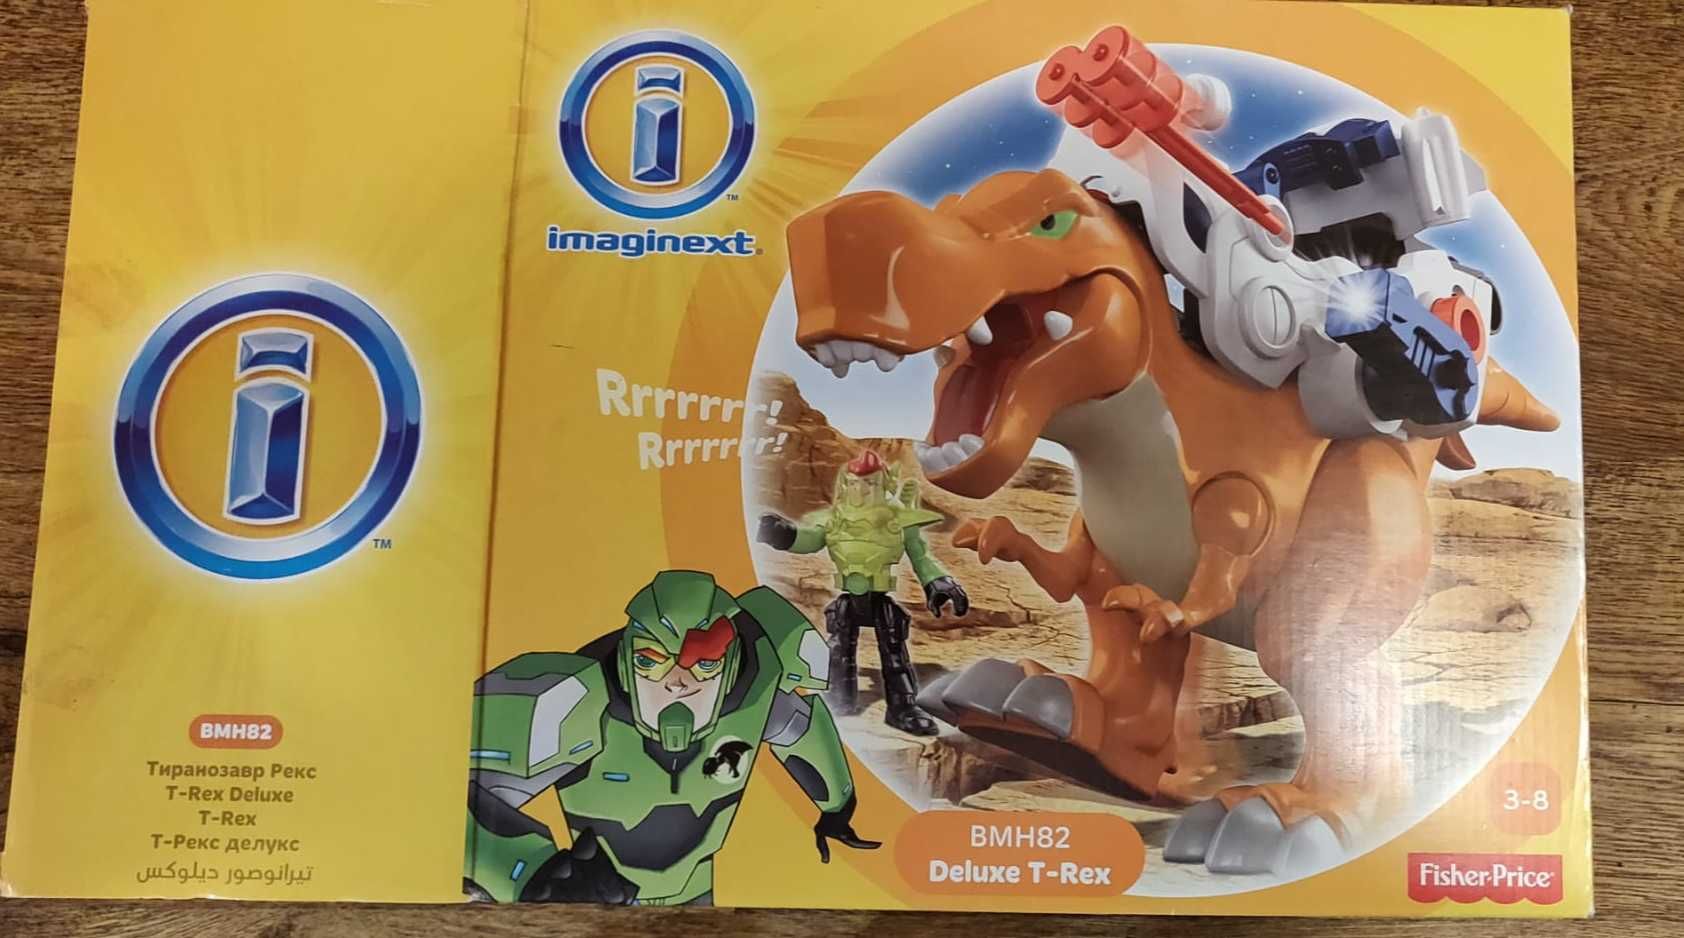 Dinozaur Imaginext T-Rex Deluxe BMH82 Fisher-Price